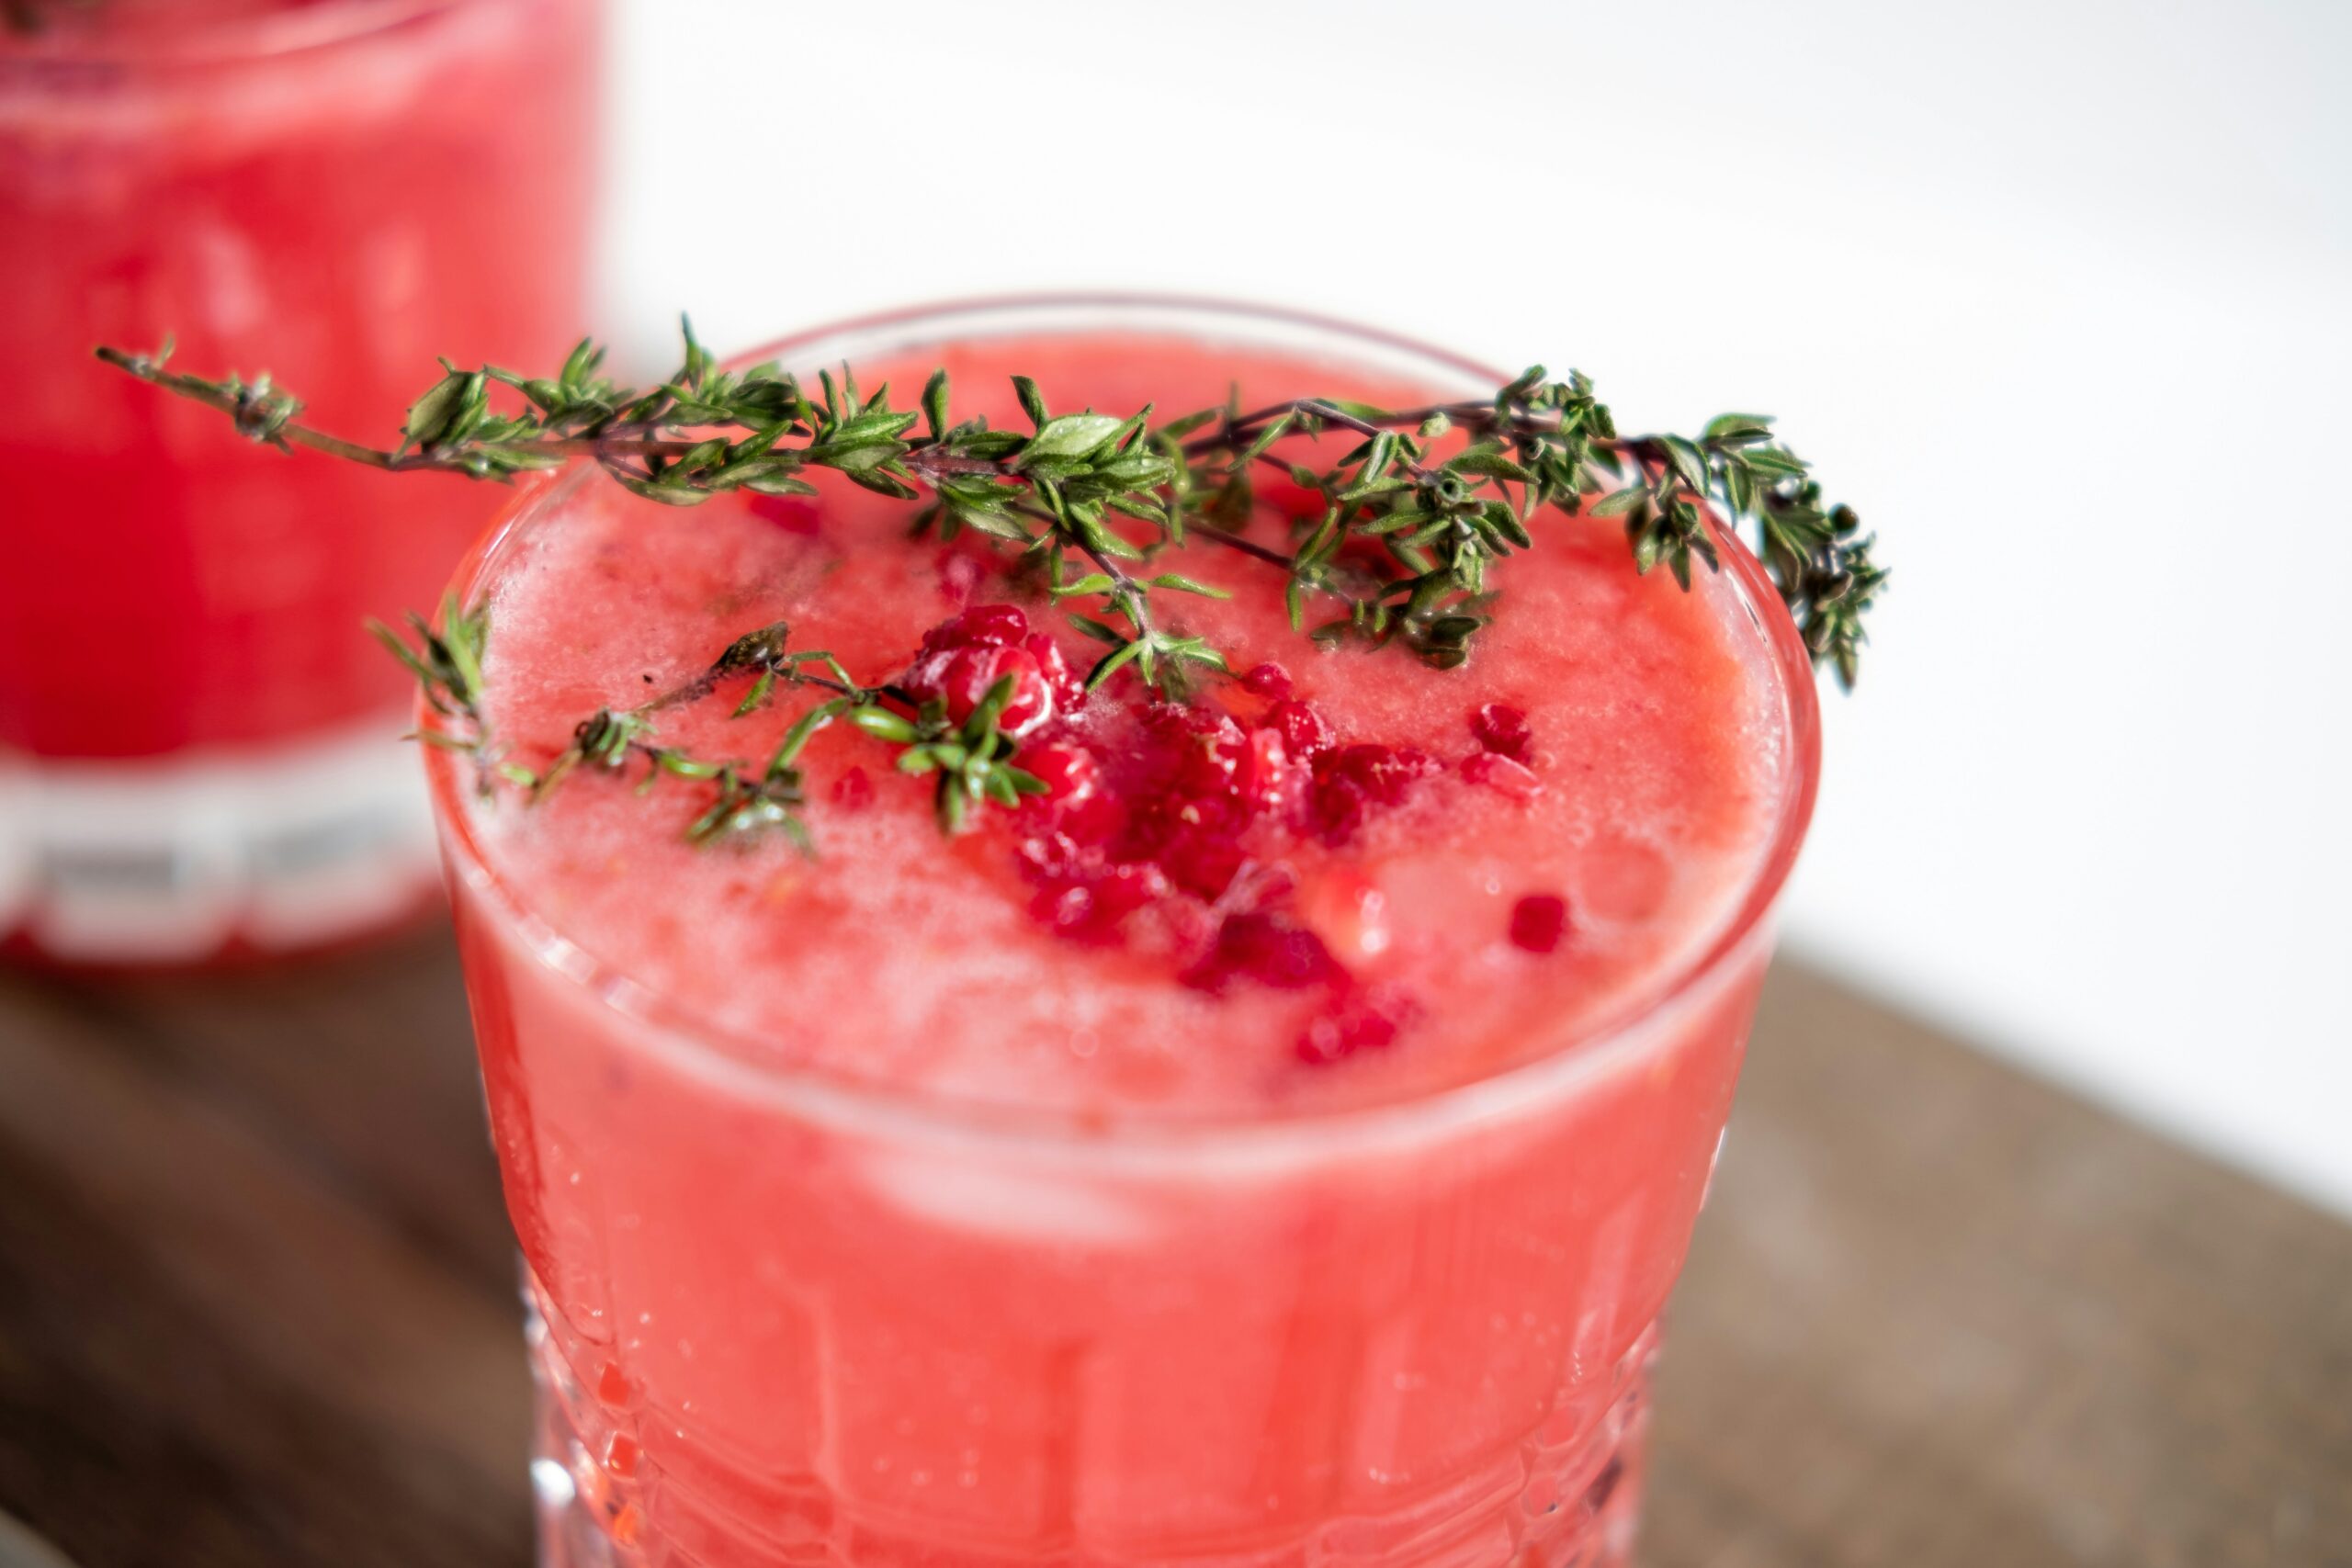 This cranberry drink is the perfect love mocktail for Valentine's Day. Pictured: A cranberry drink